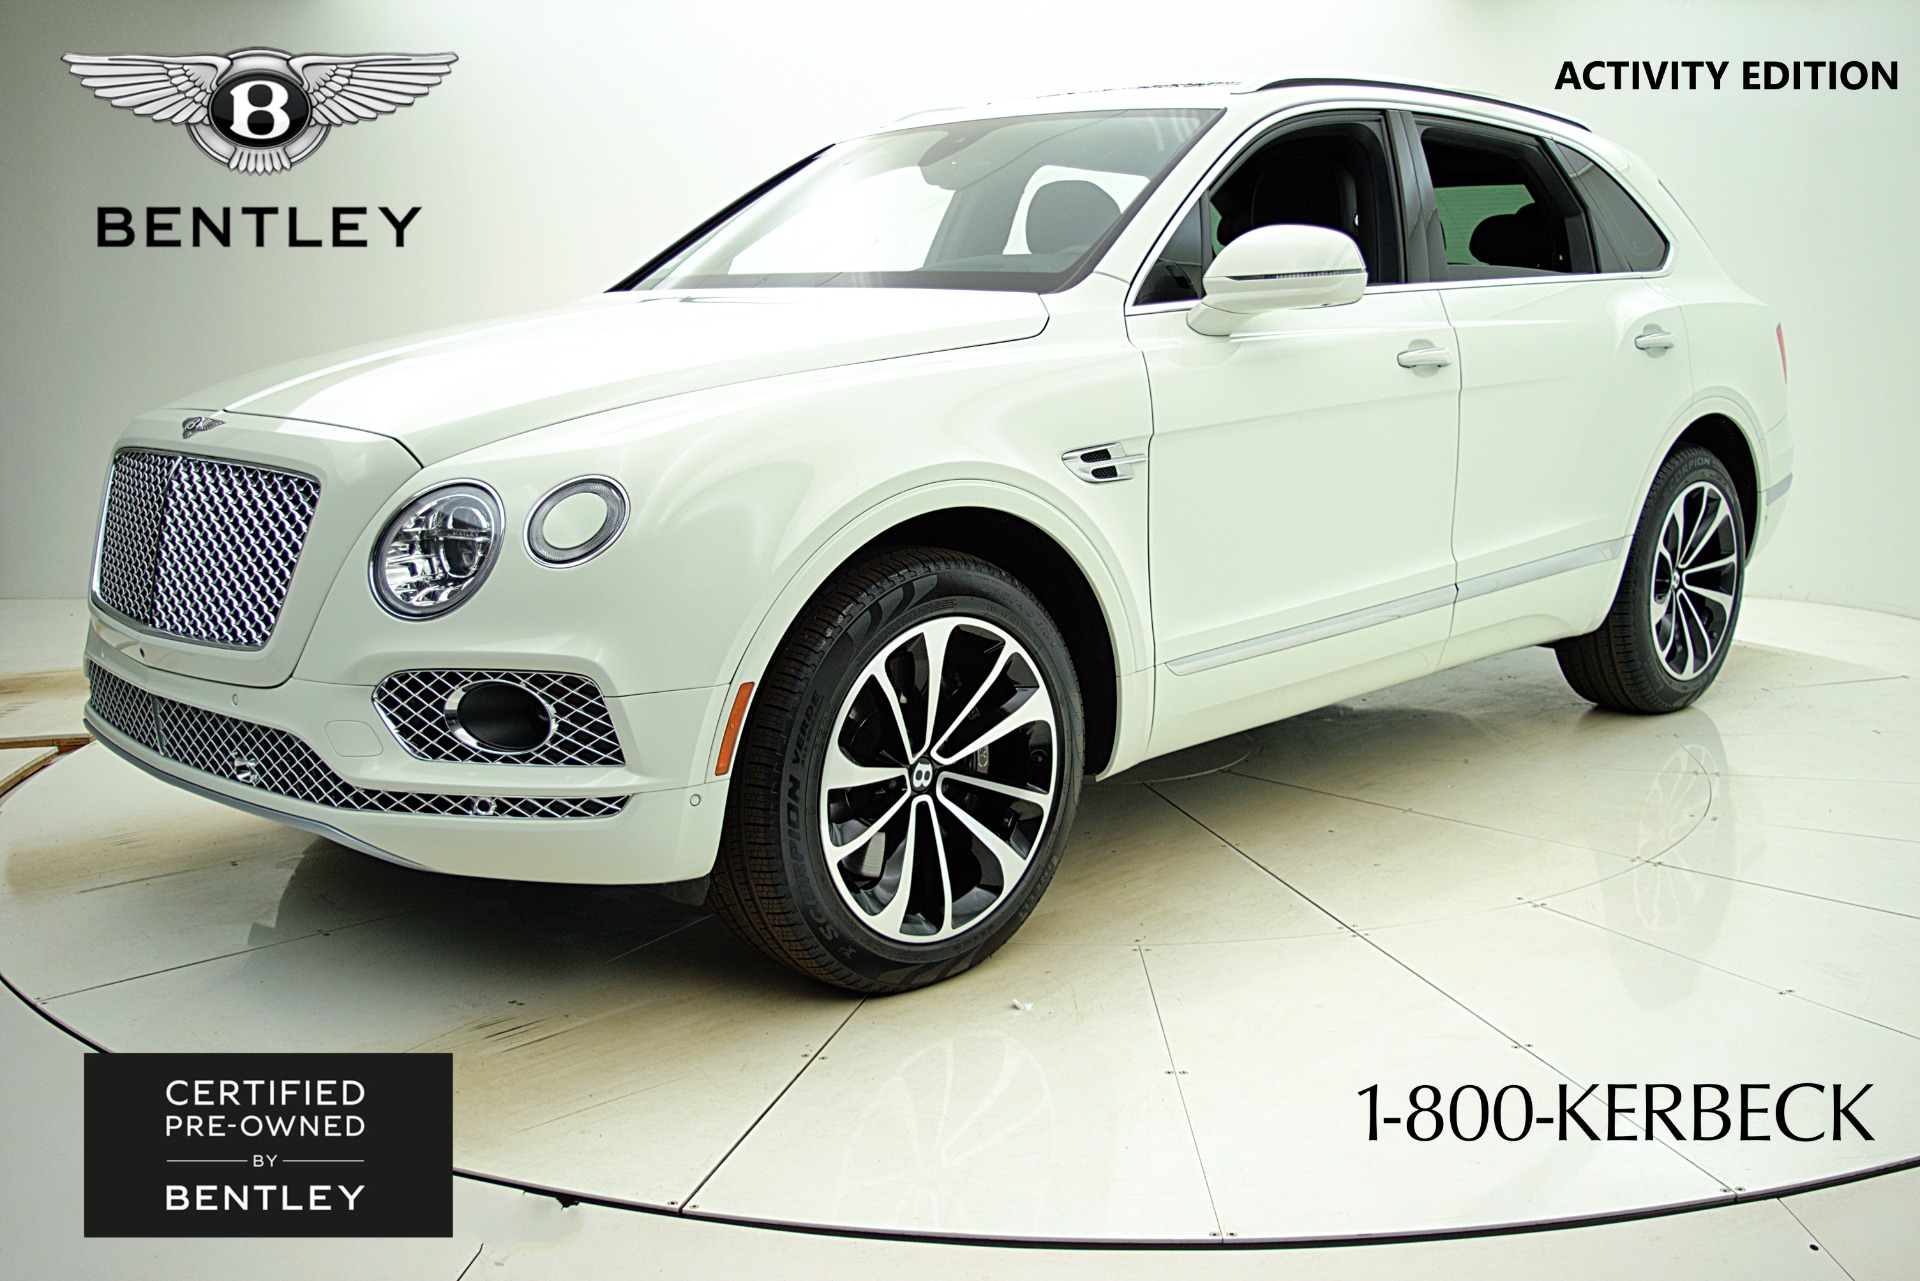 Used 2018 Bentley Bentayga W12 Signature AWD / LEASE OPTIONS AVAILABLE for sale Sold at Bentley Palmyra N.J. in Palmyra NJ 08065 2